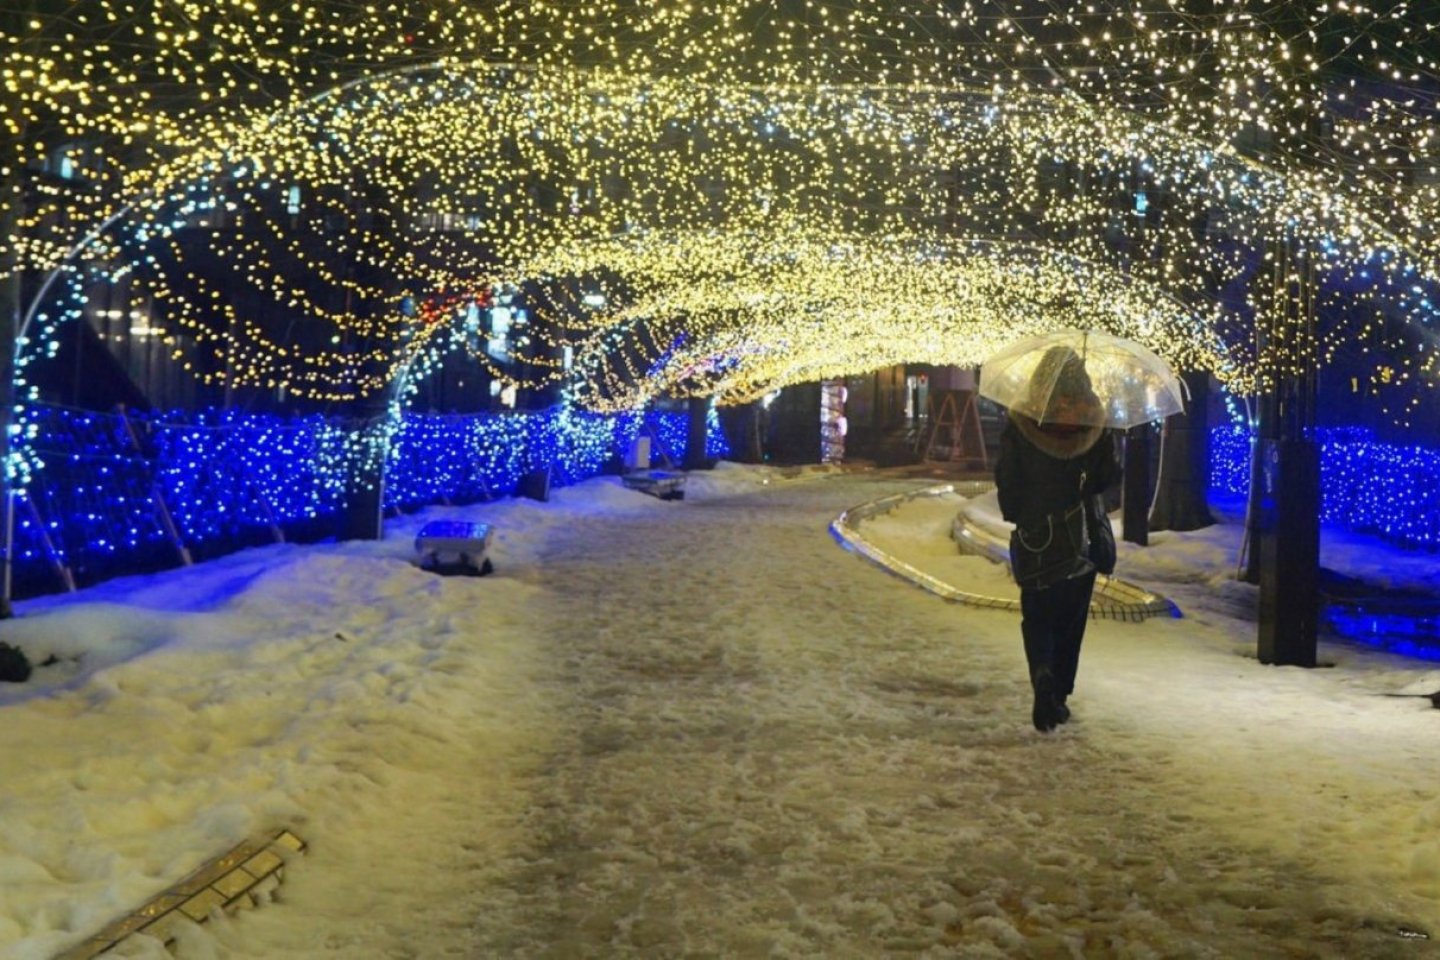 Kawabata Street is a 15 minute stroll from Akita railway station, which is transformed into a winter wonderland.